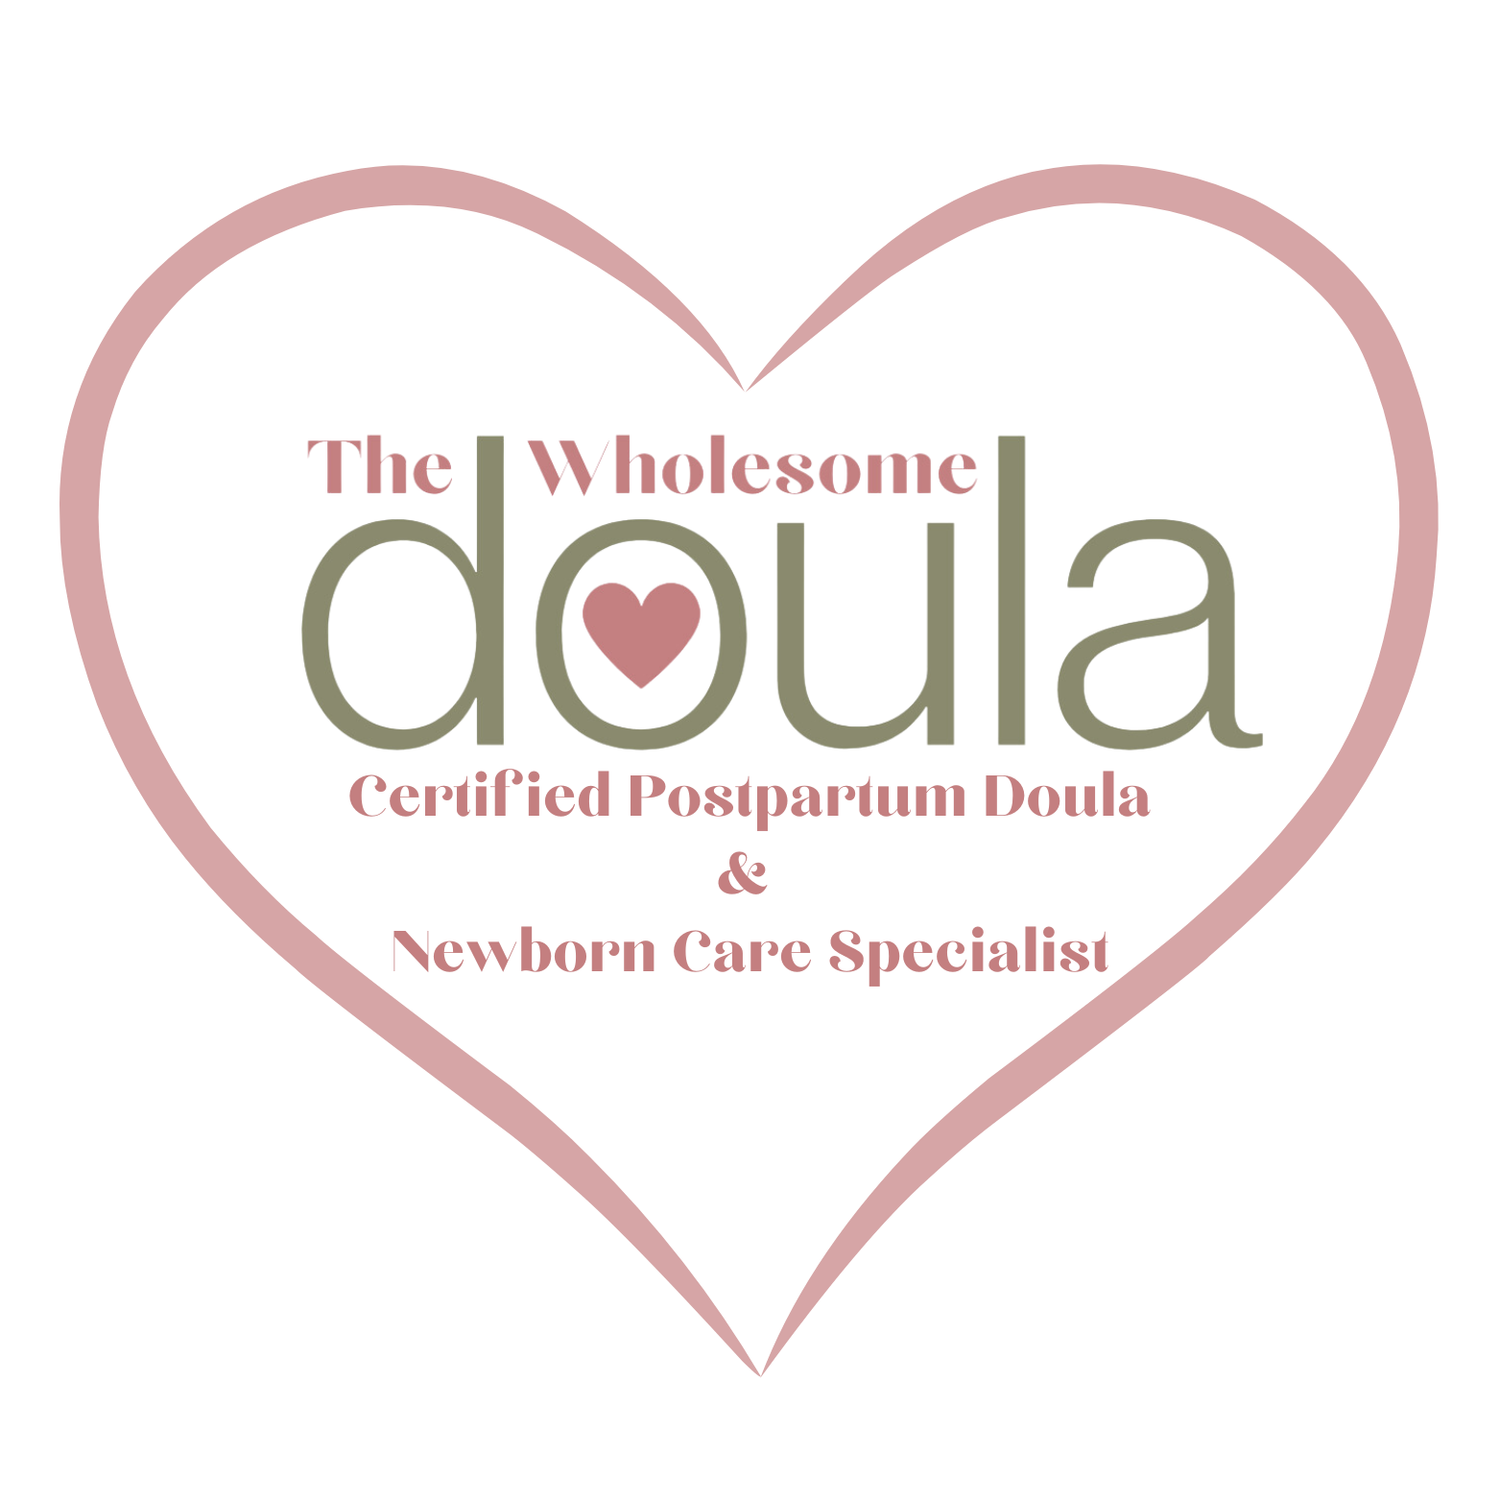 The Wholesome Doula